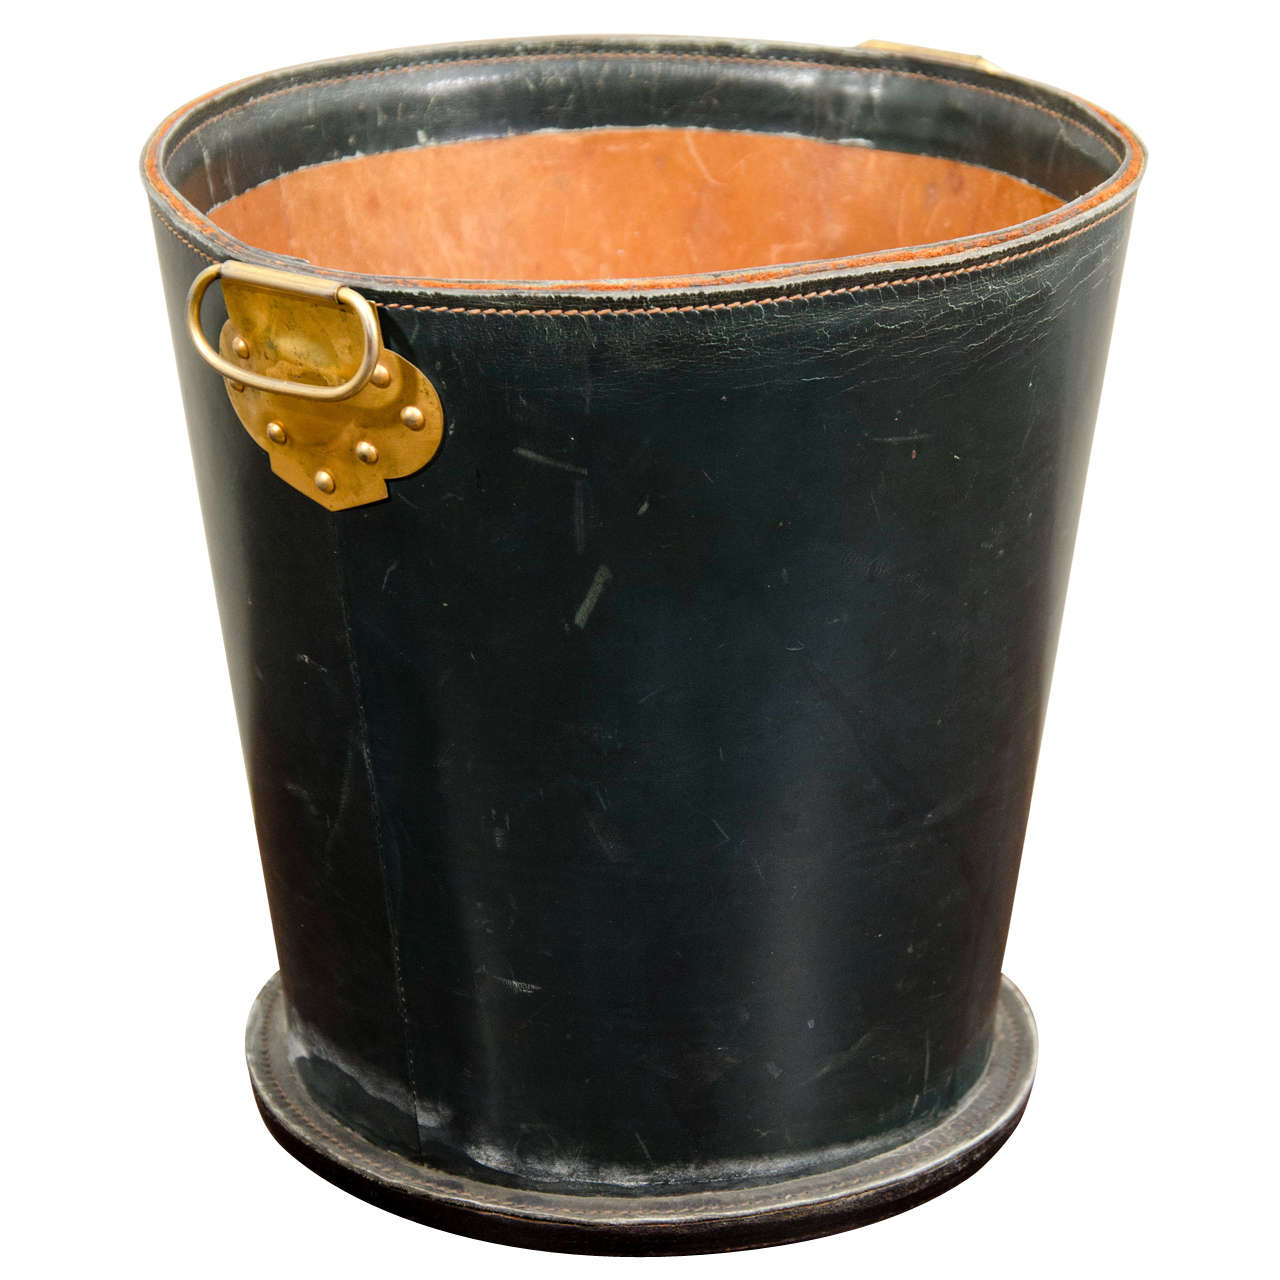 French Leather Waste Paper Basket With Brass Handle